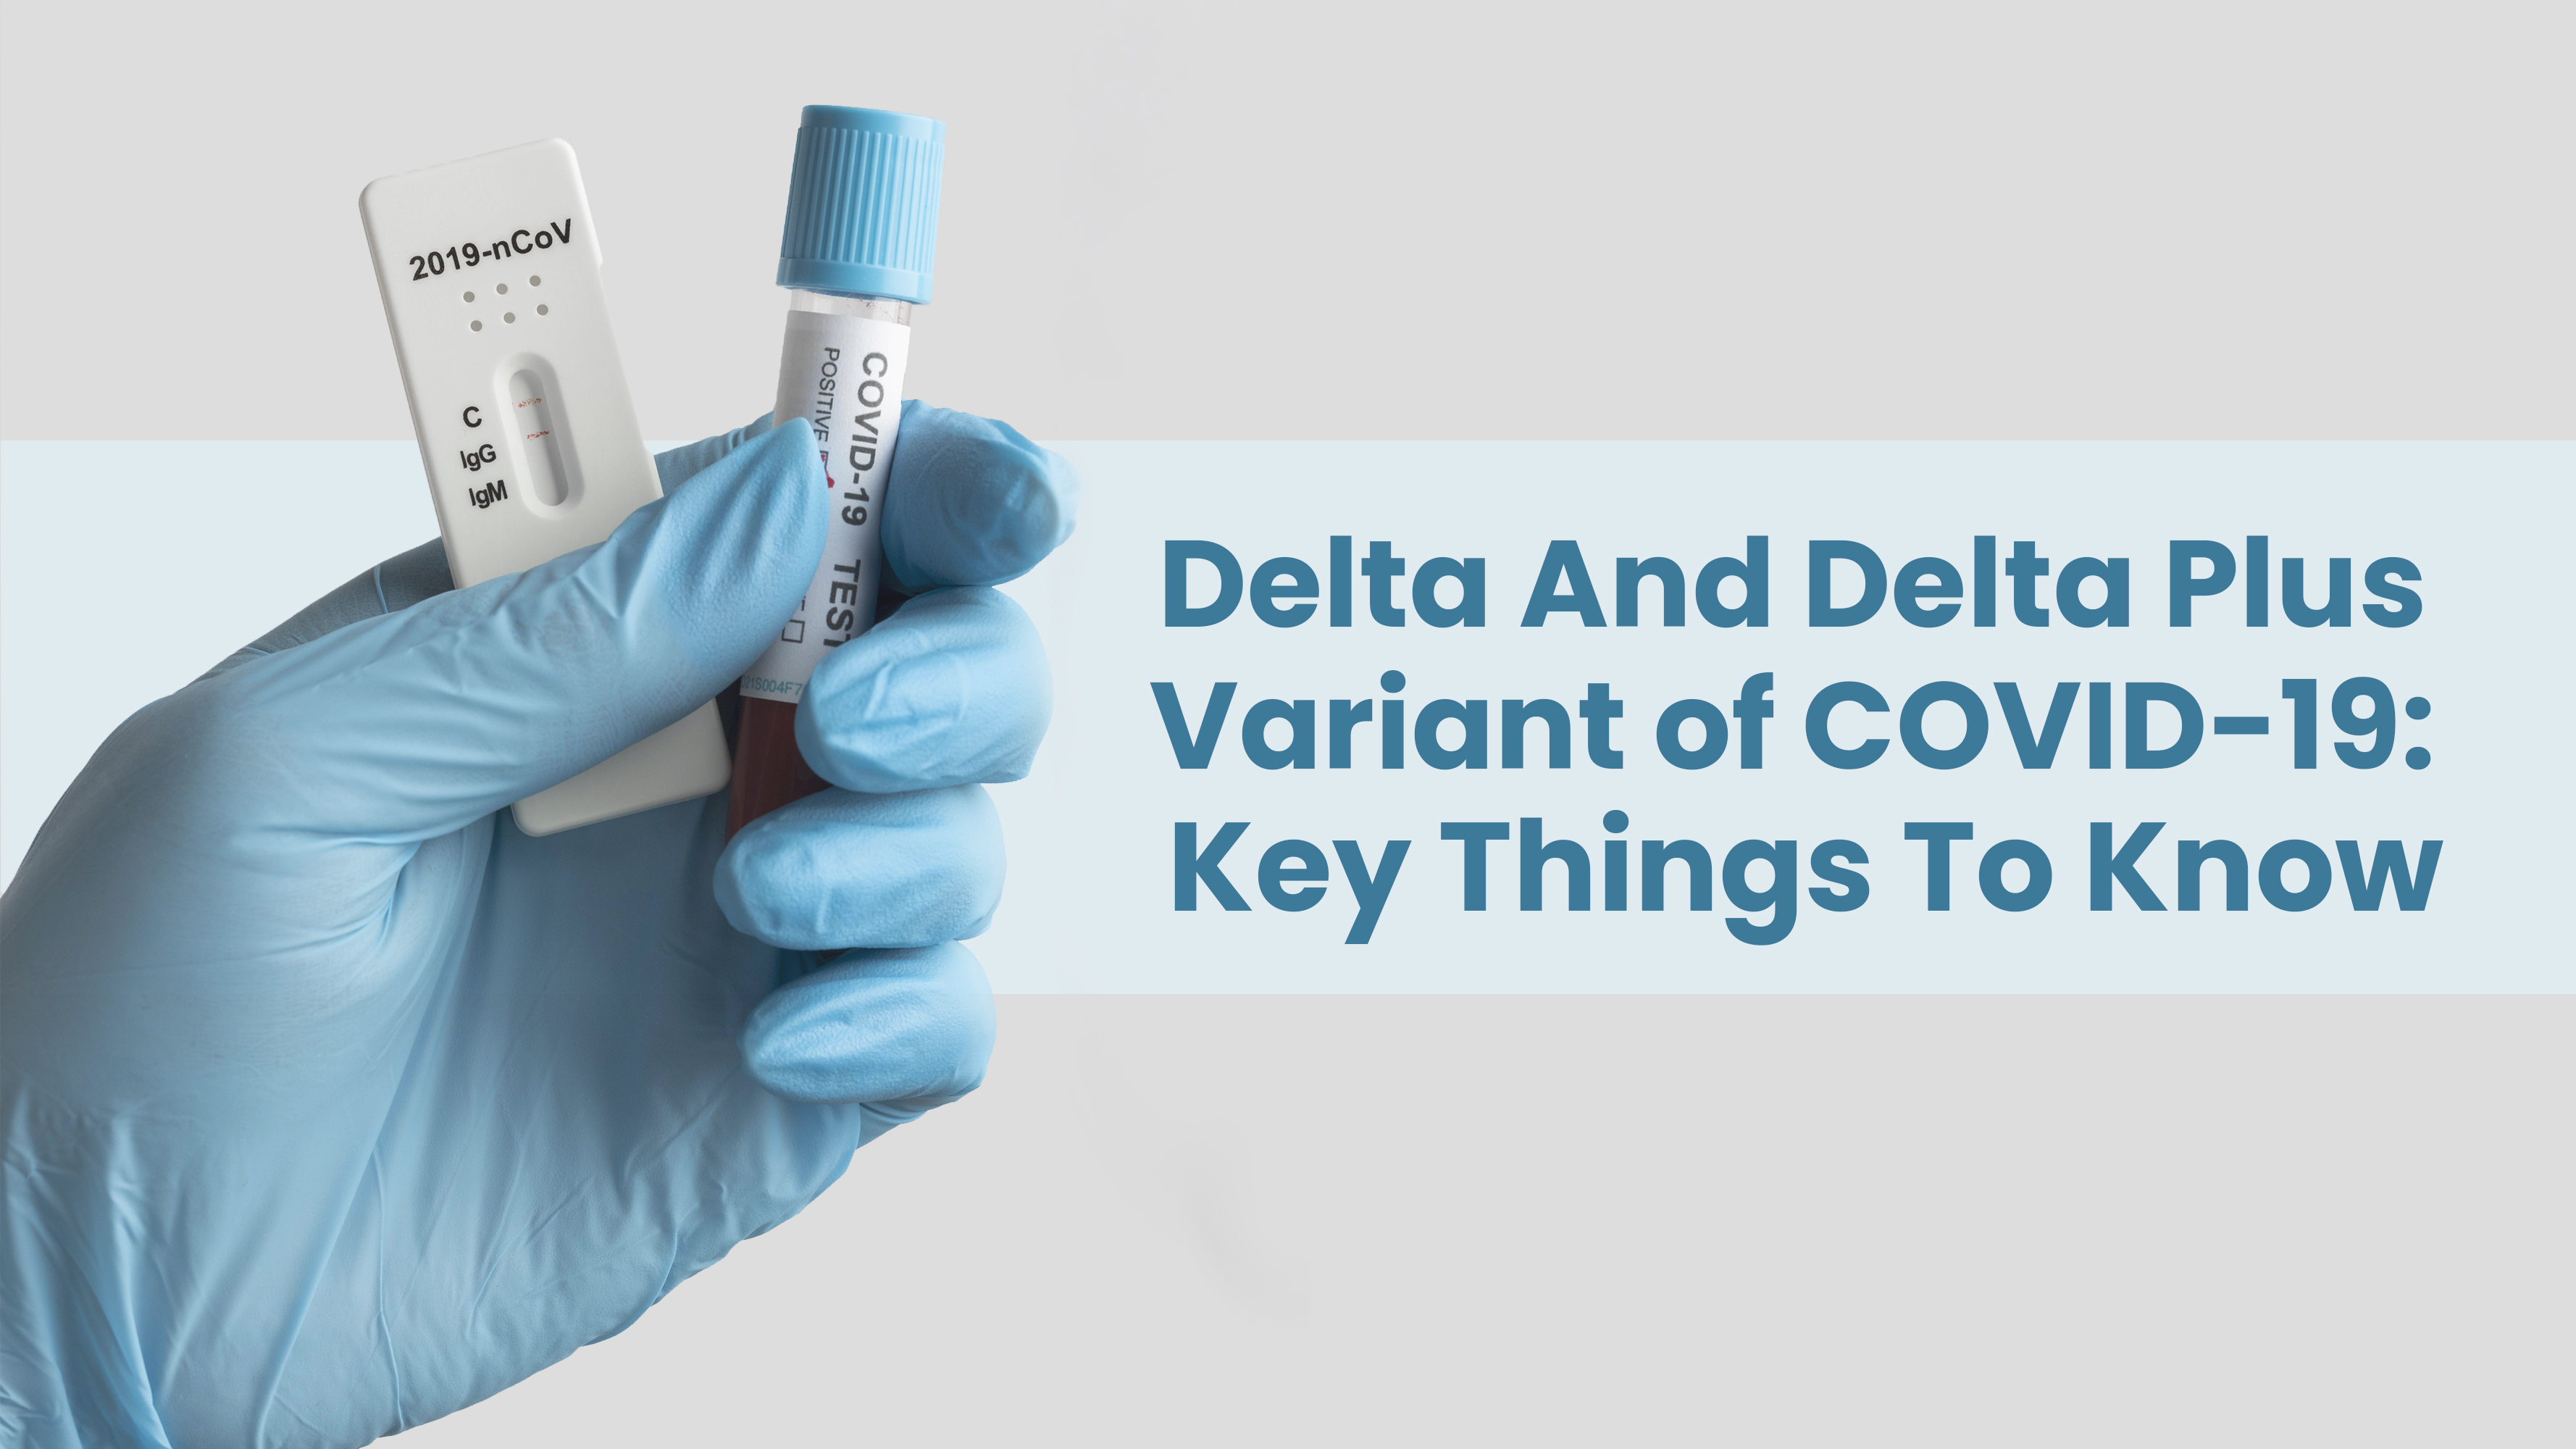 Are covid-19 vaccines effective against Delta and Delta Plus Variants